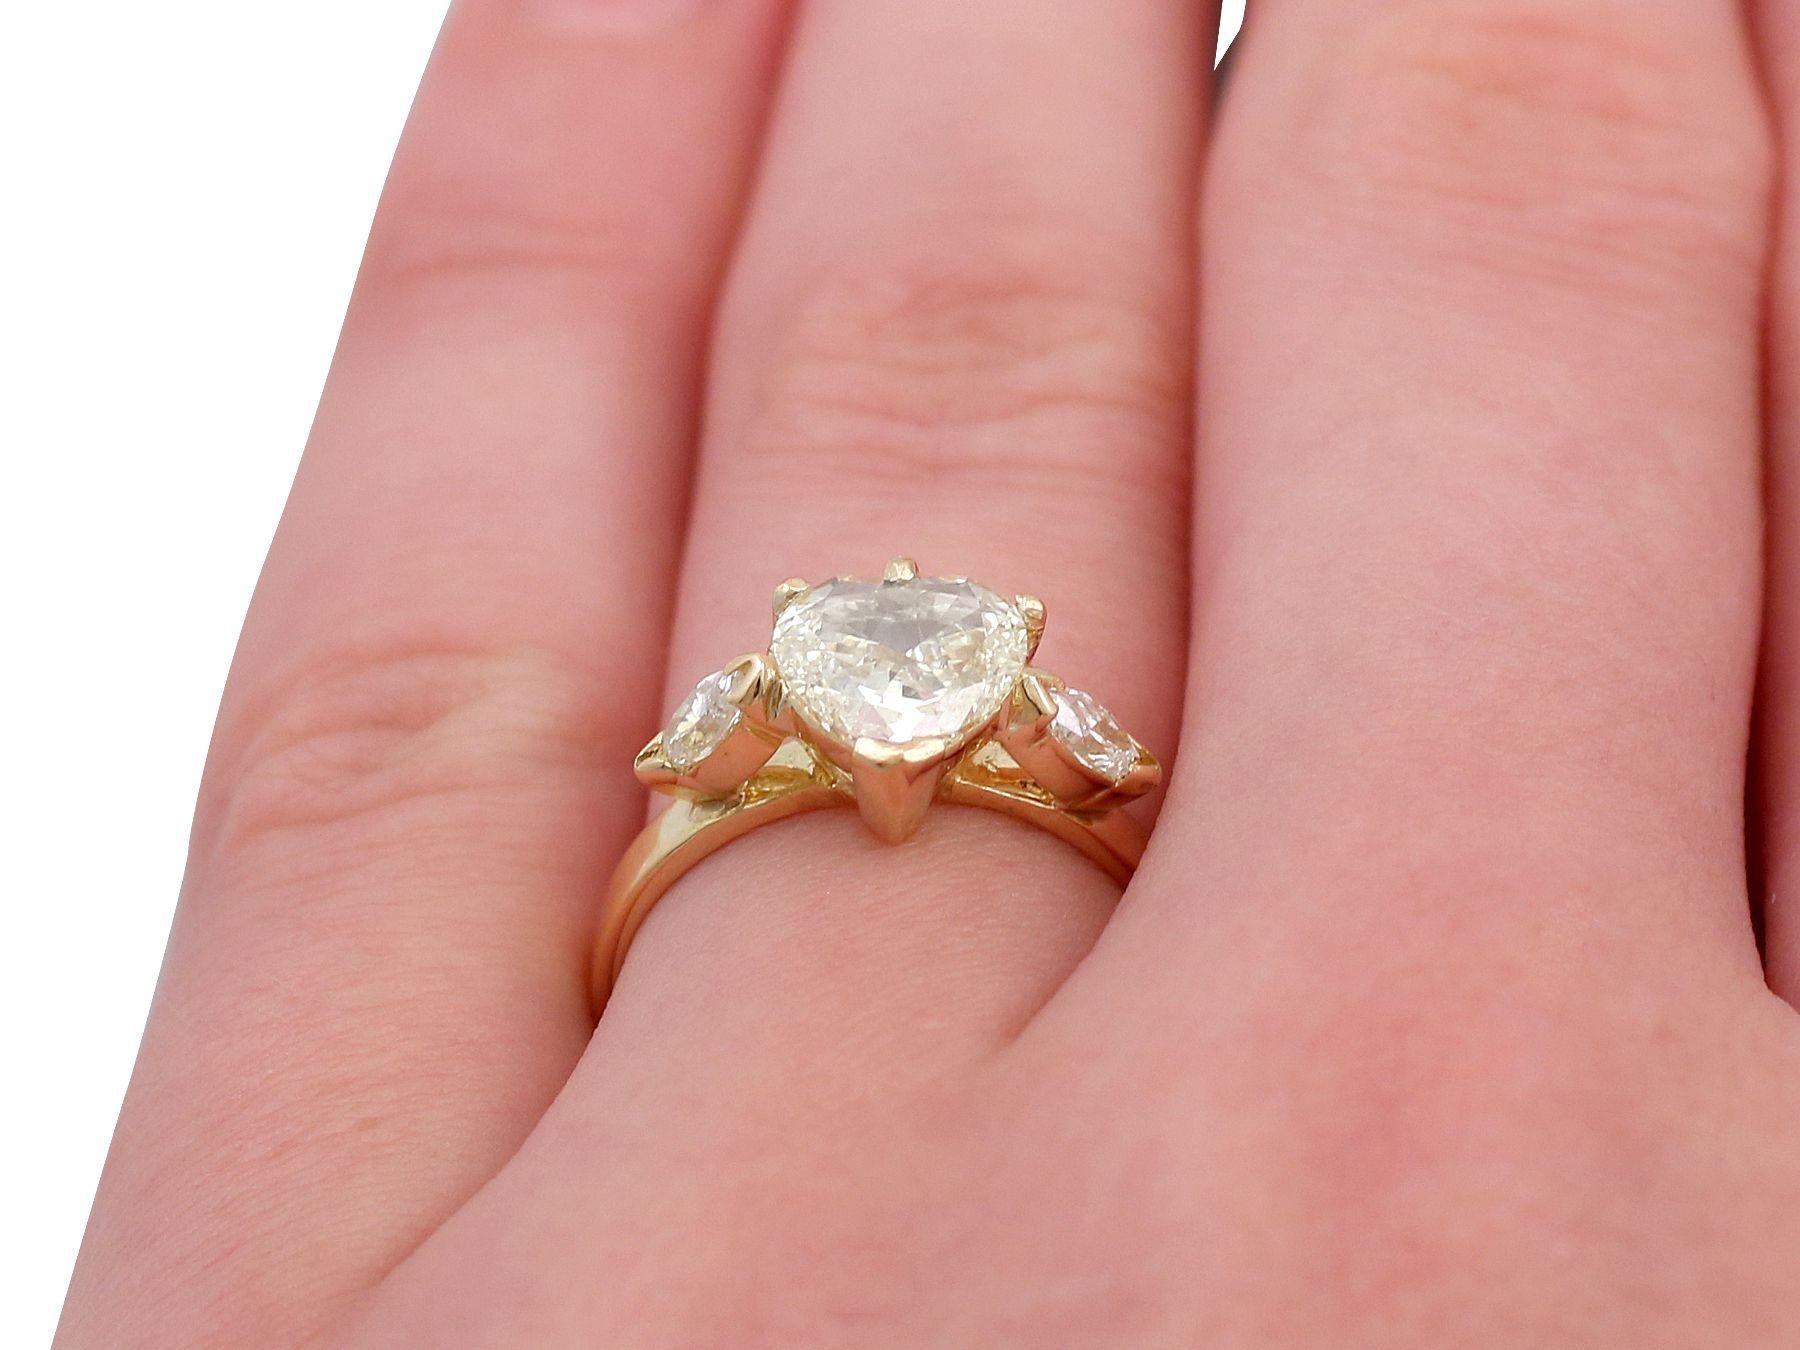 Vintage French 1.32 Carat Diamond and Yellow Gold Engagement Ring For Sale 1